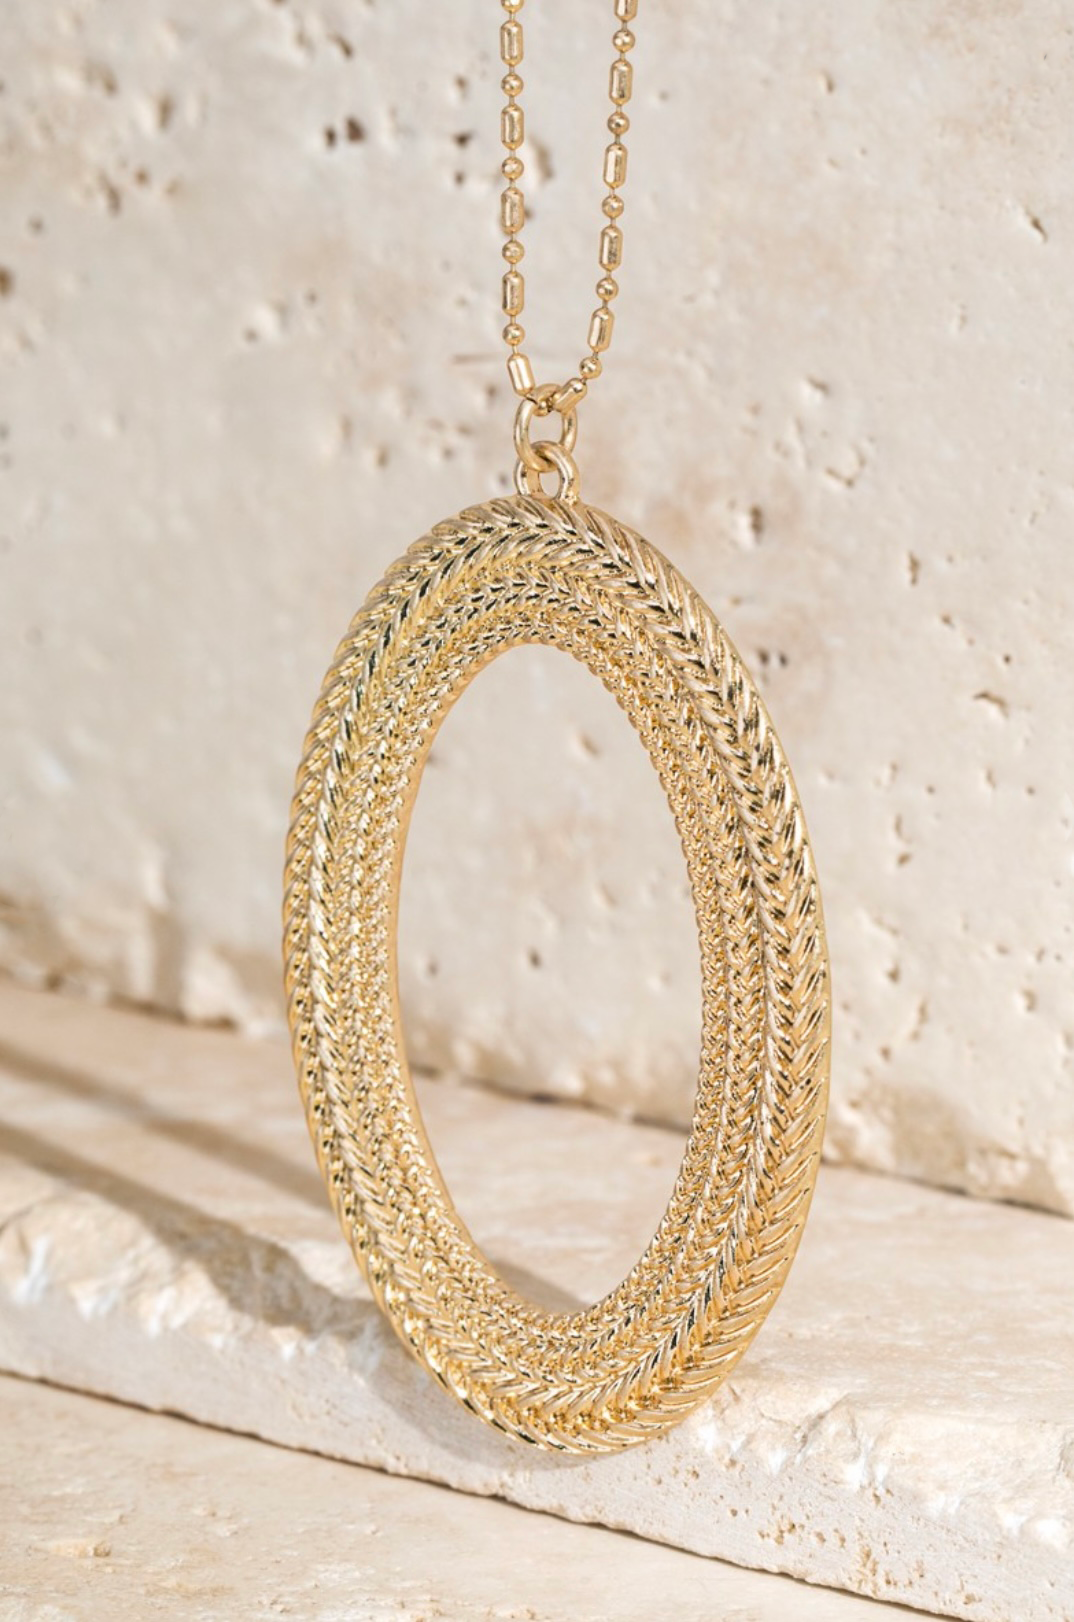 CONTEMPORARY OPEN OVAL NECKLACE